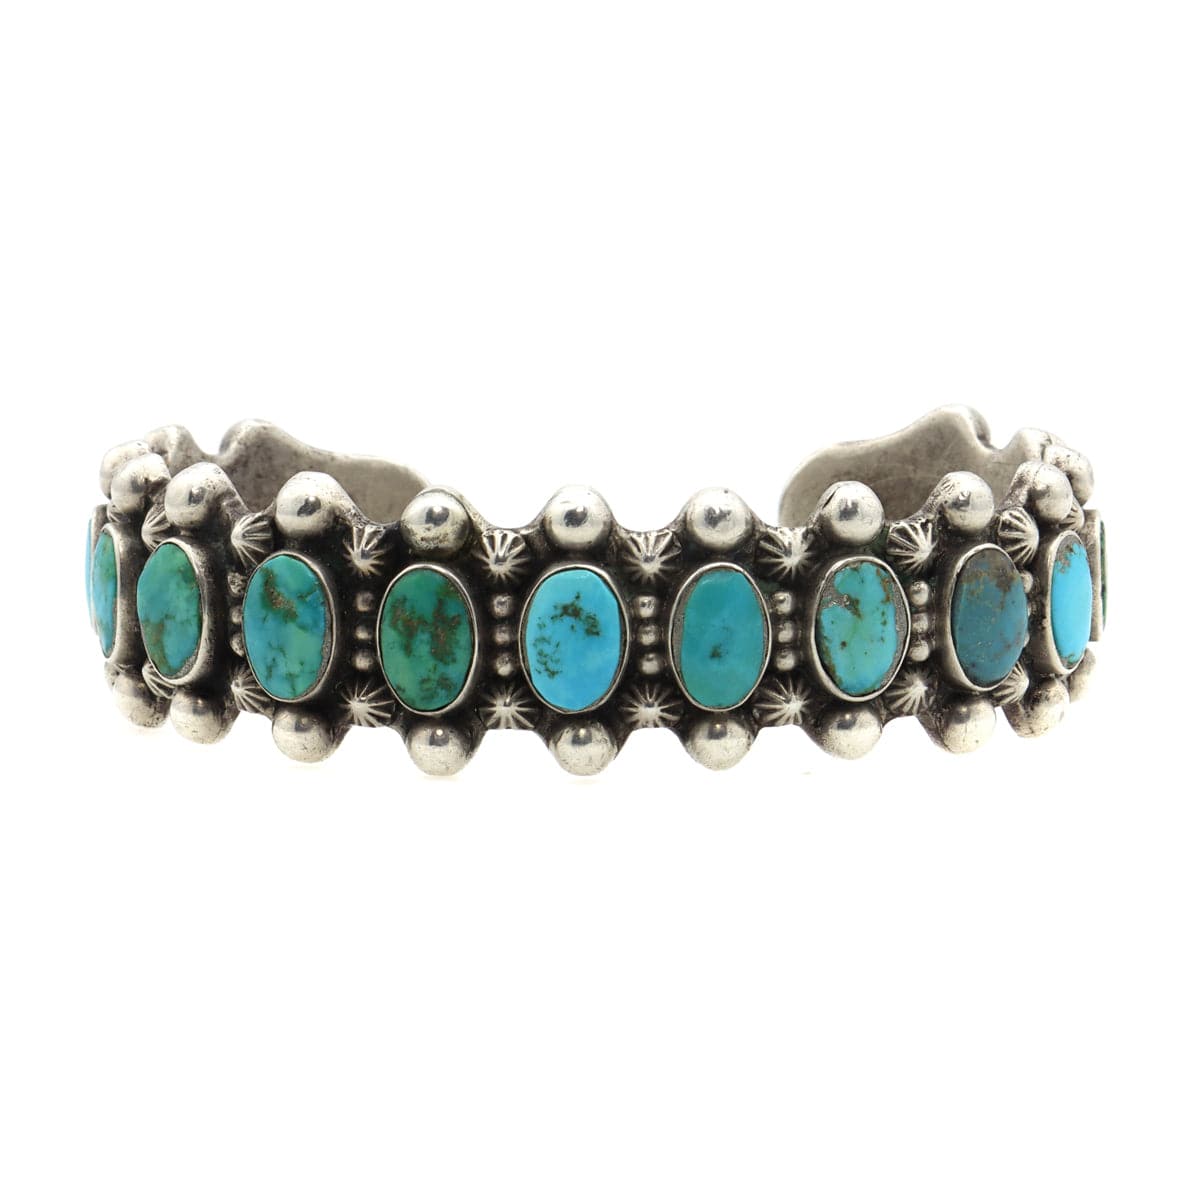 Navajo Turquoise and Silver Bracelet with Row Design c. 1930s, size 6.75 (J13129)
